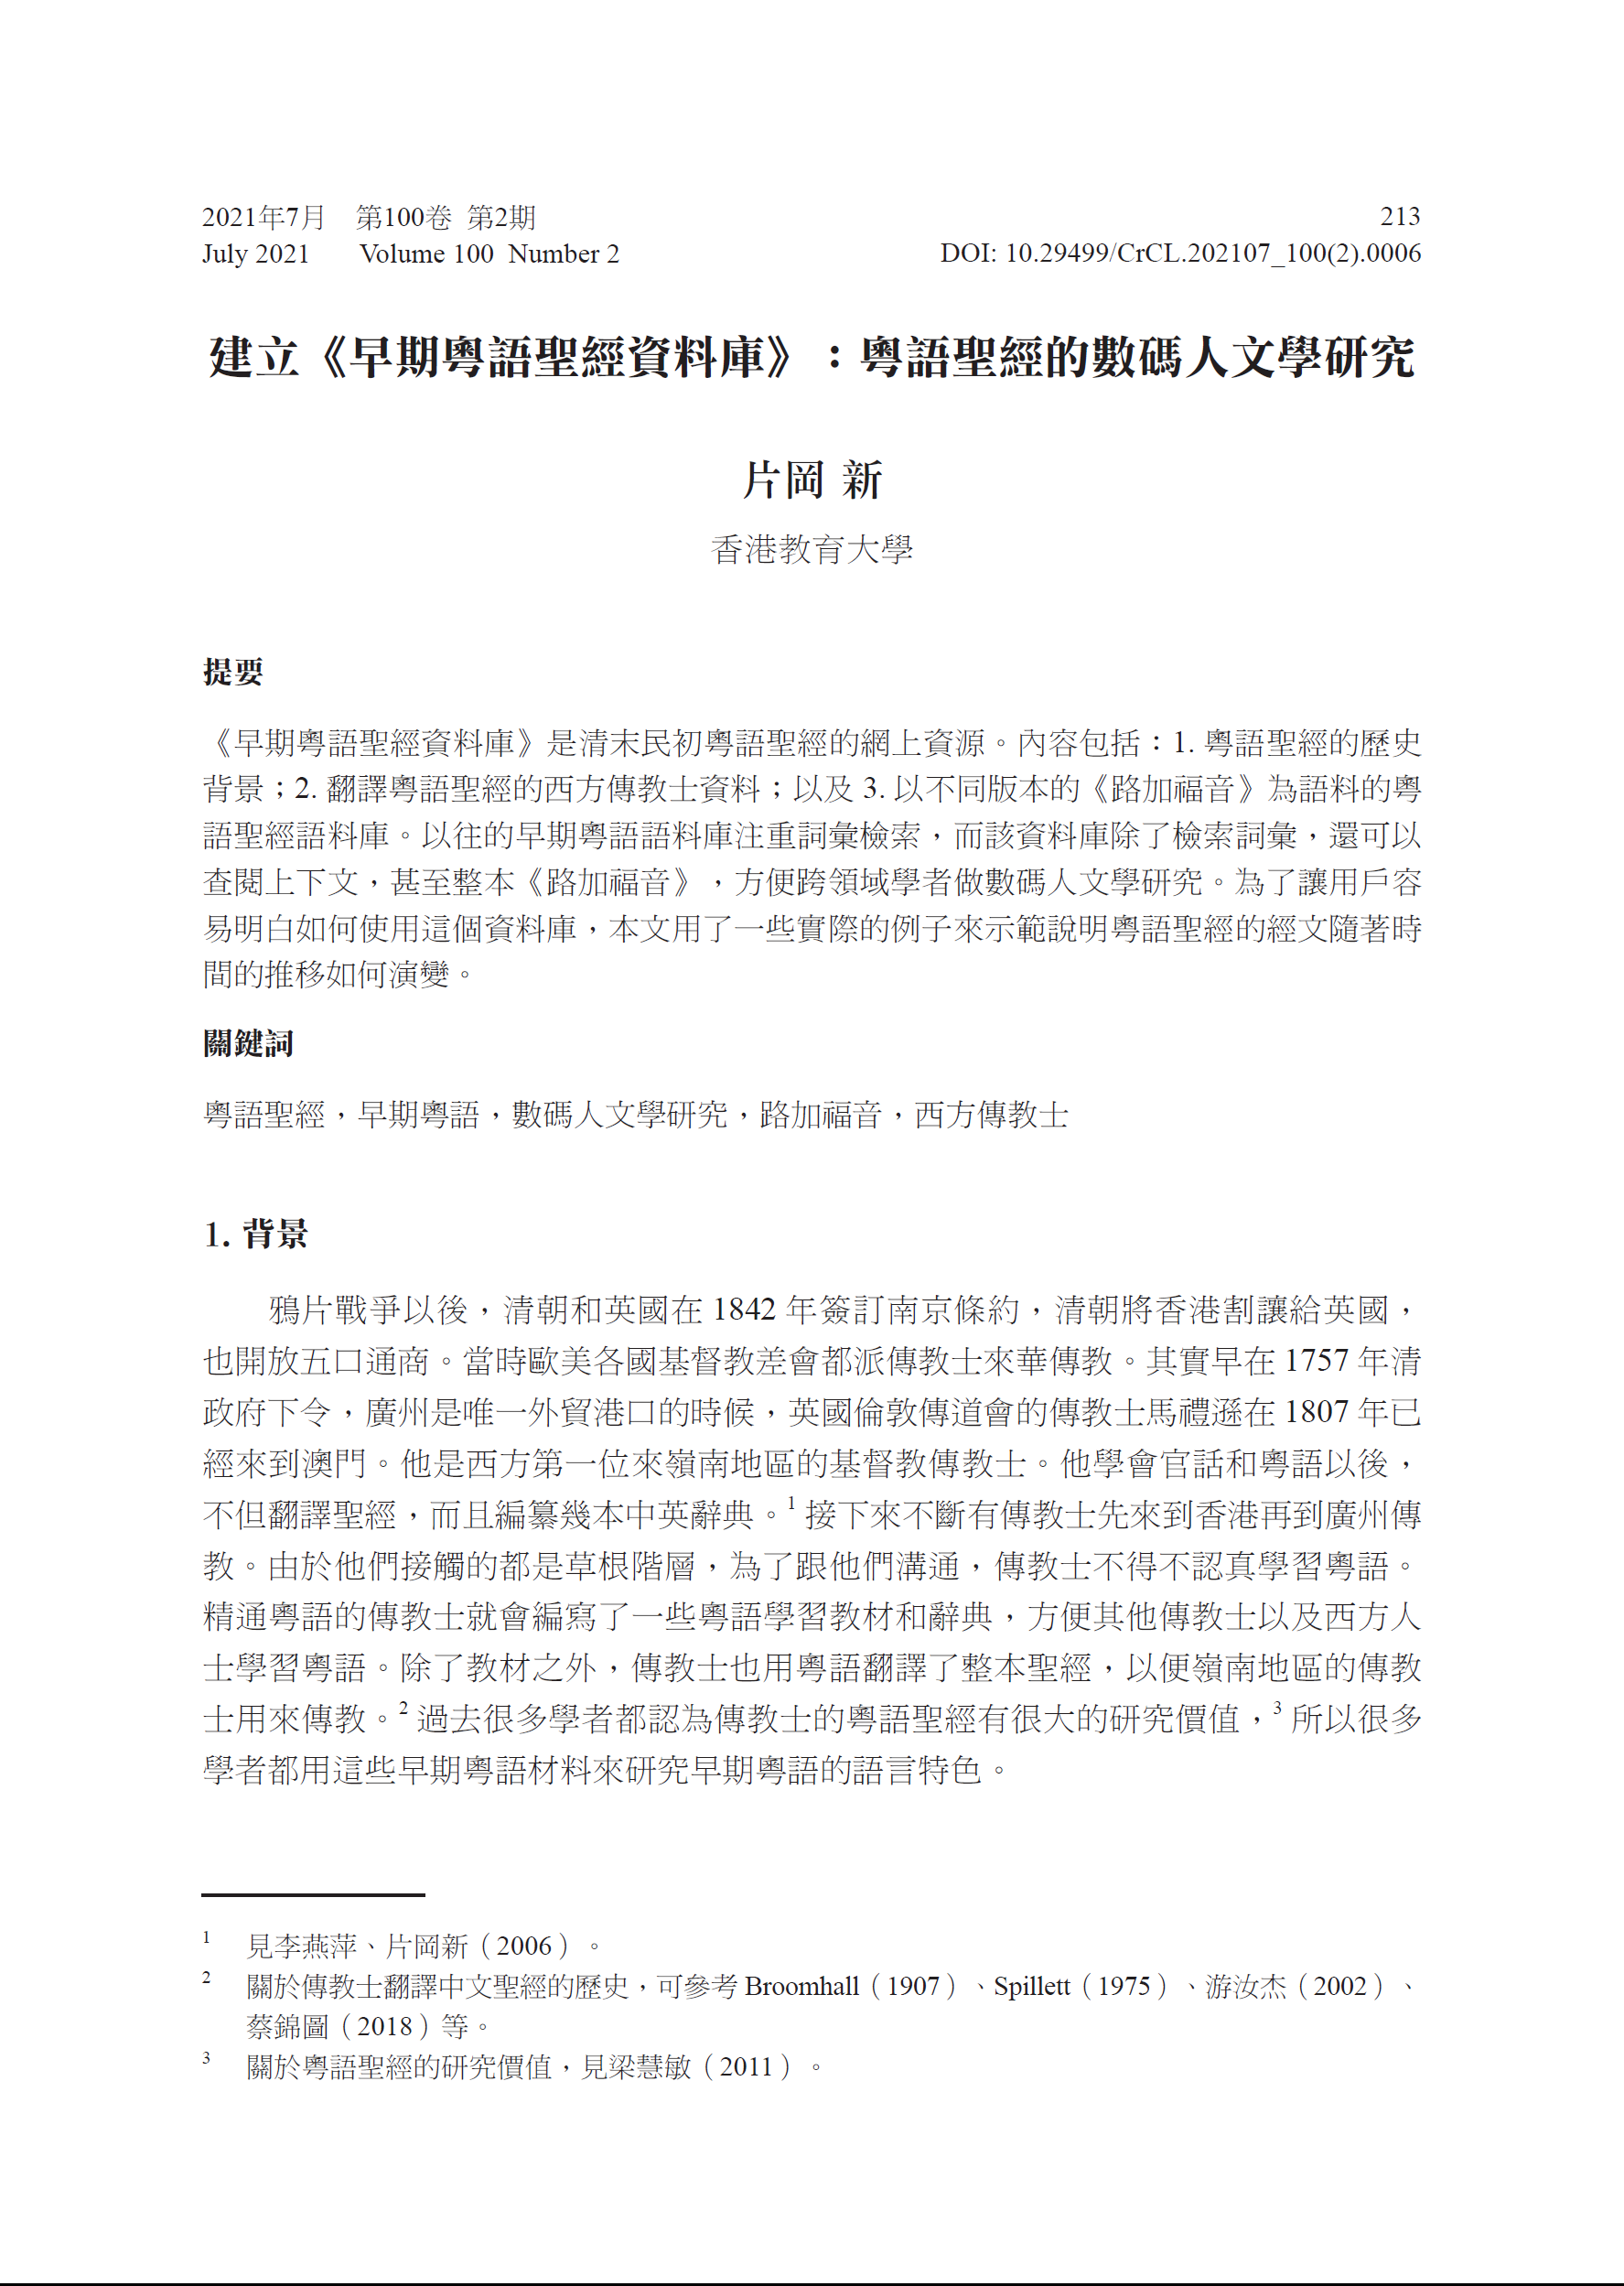 A Chinese research report titled "建立《粵語聖經資料庫》：早期粵語的數碼人文學研究"